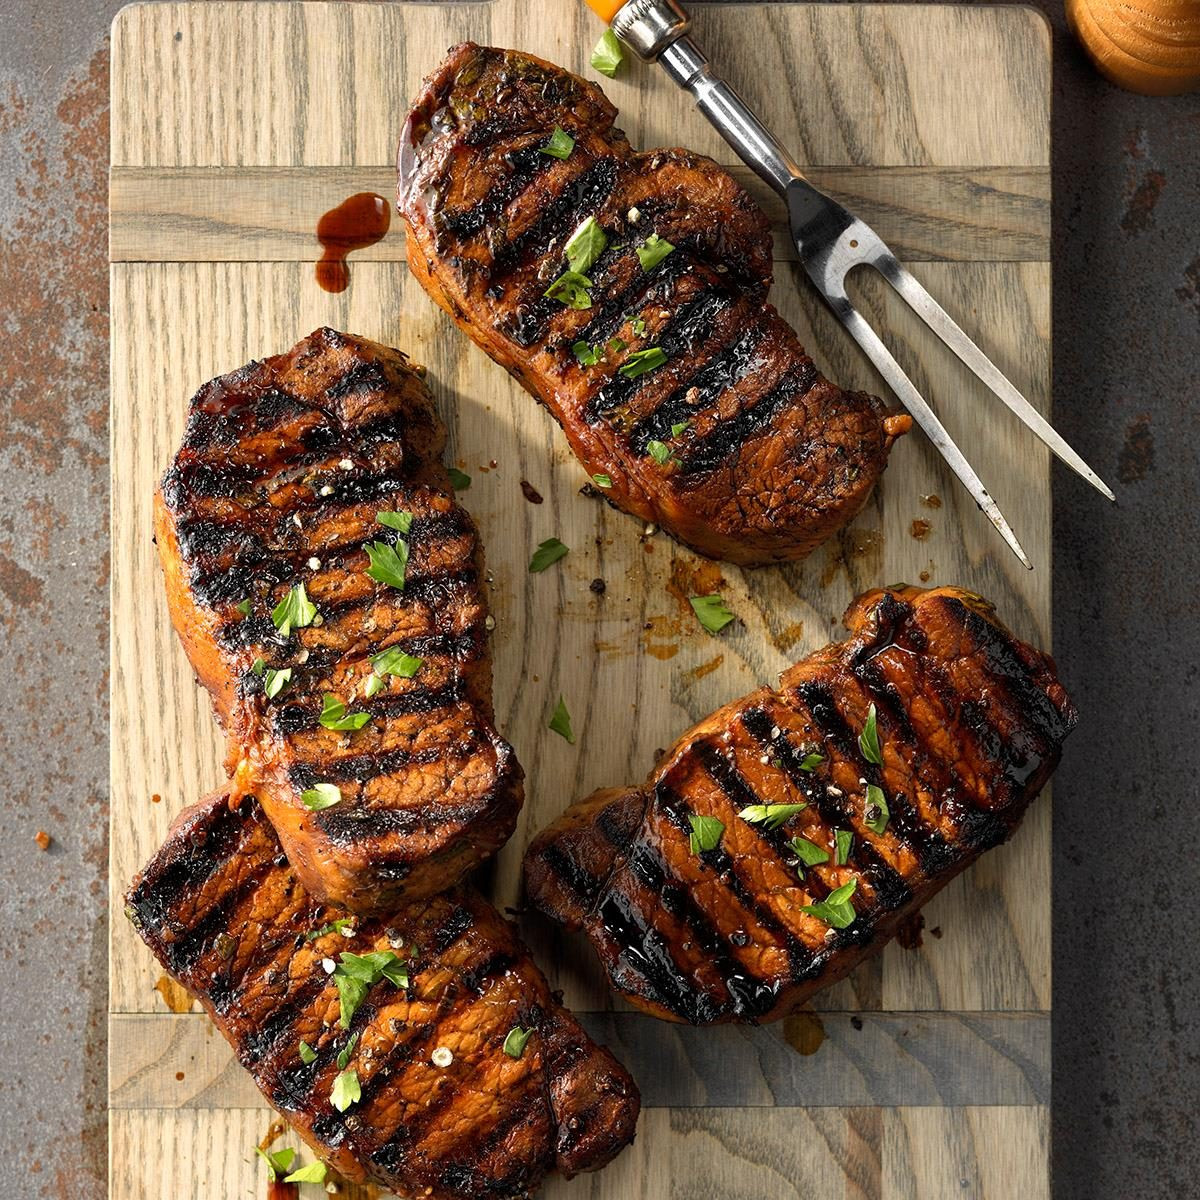 Pork Chops On The Grill Recipes
 Favorite Grilled Pork Chops Recipe